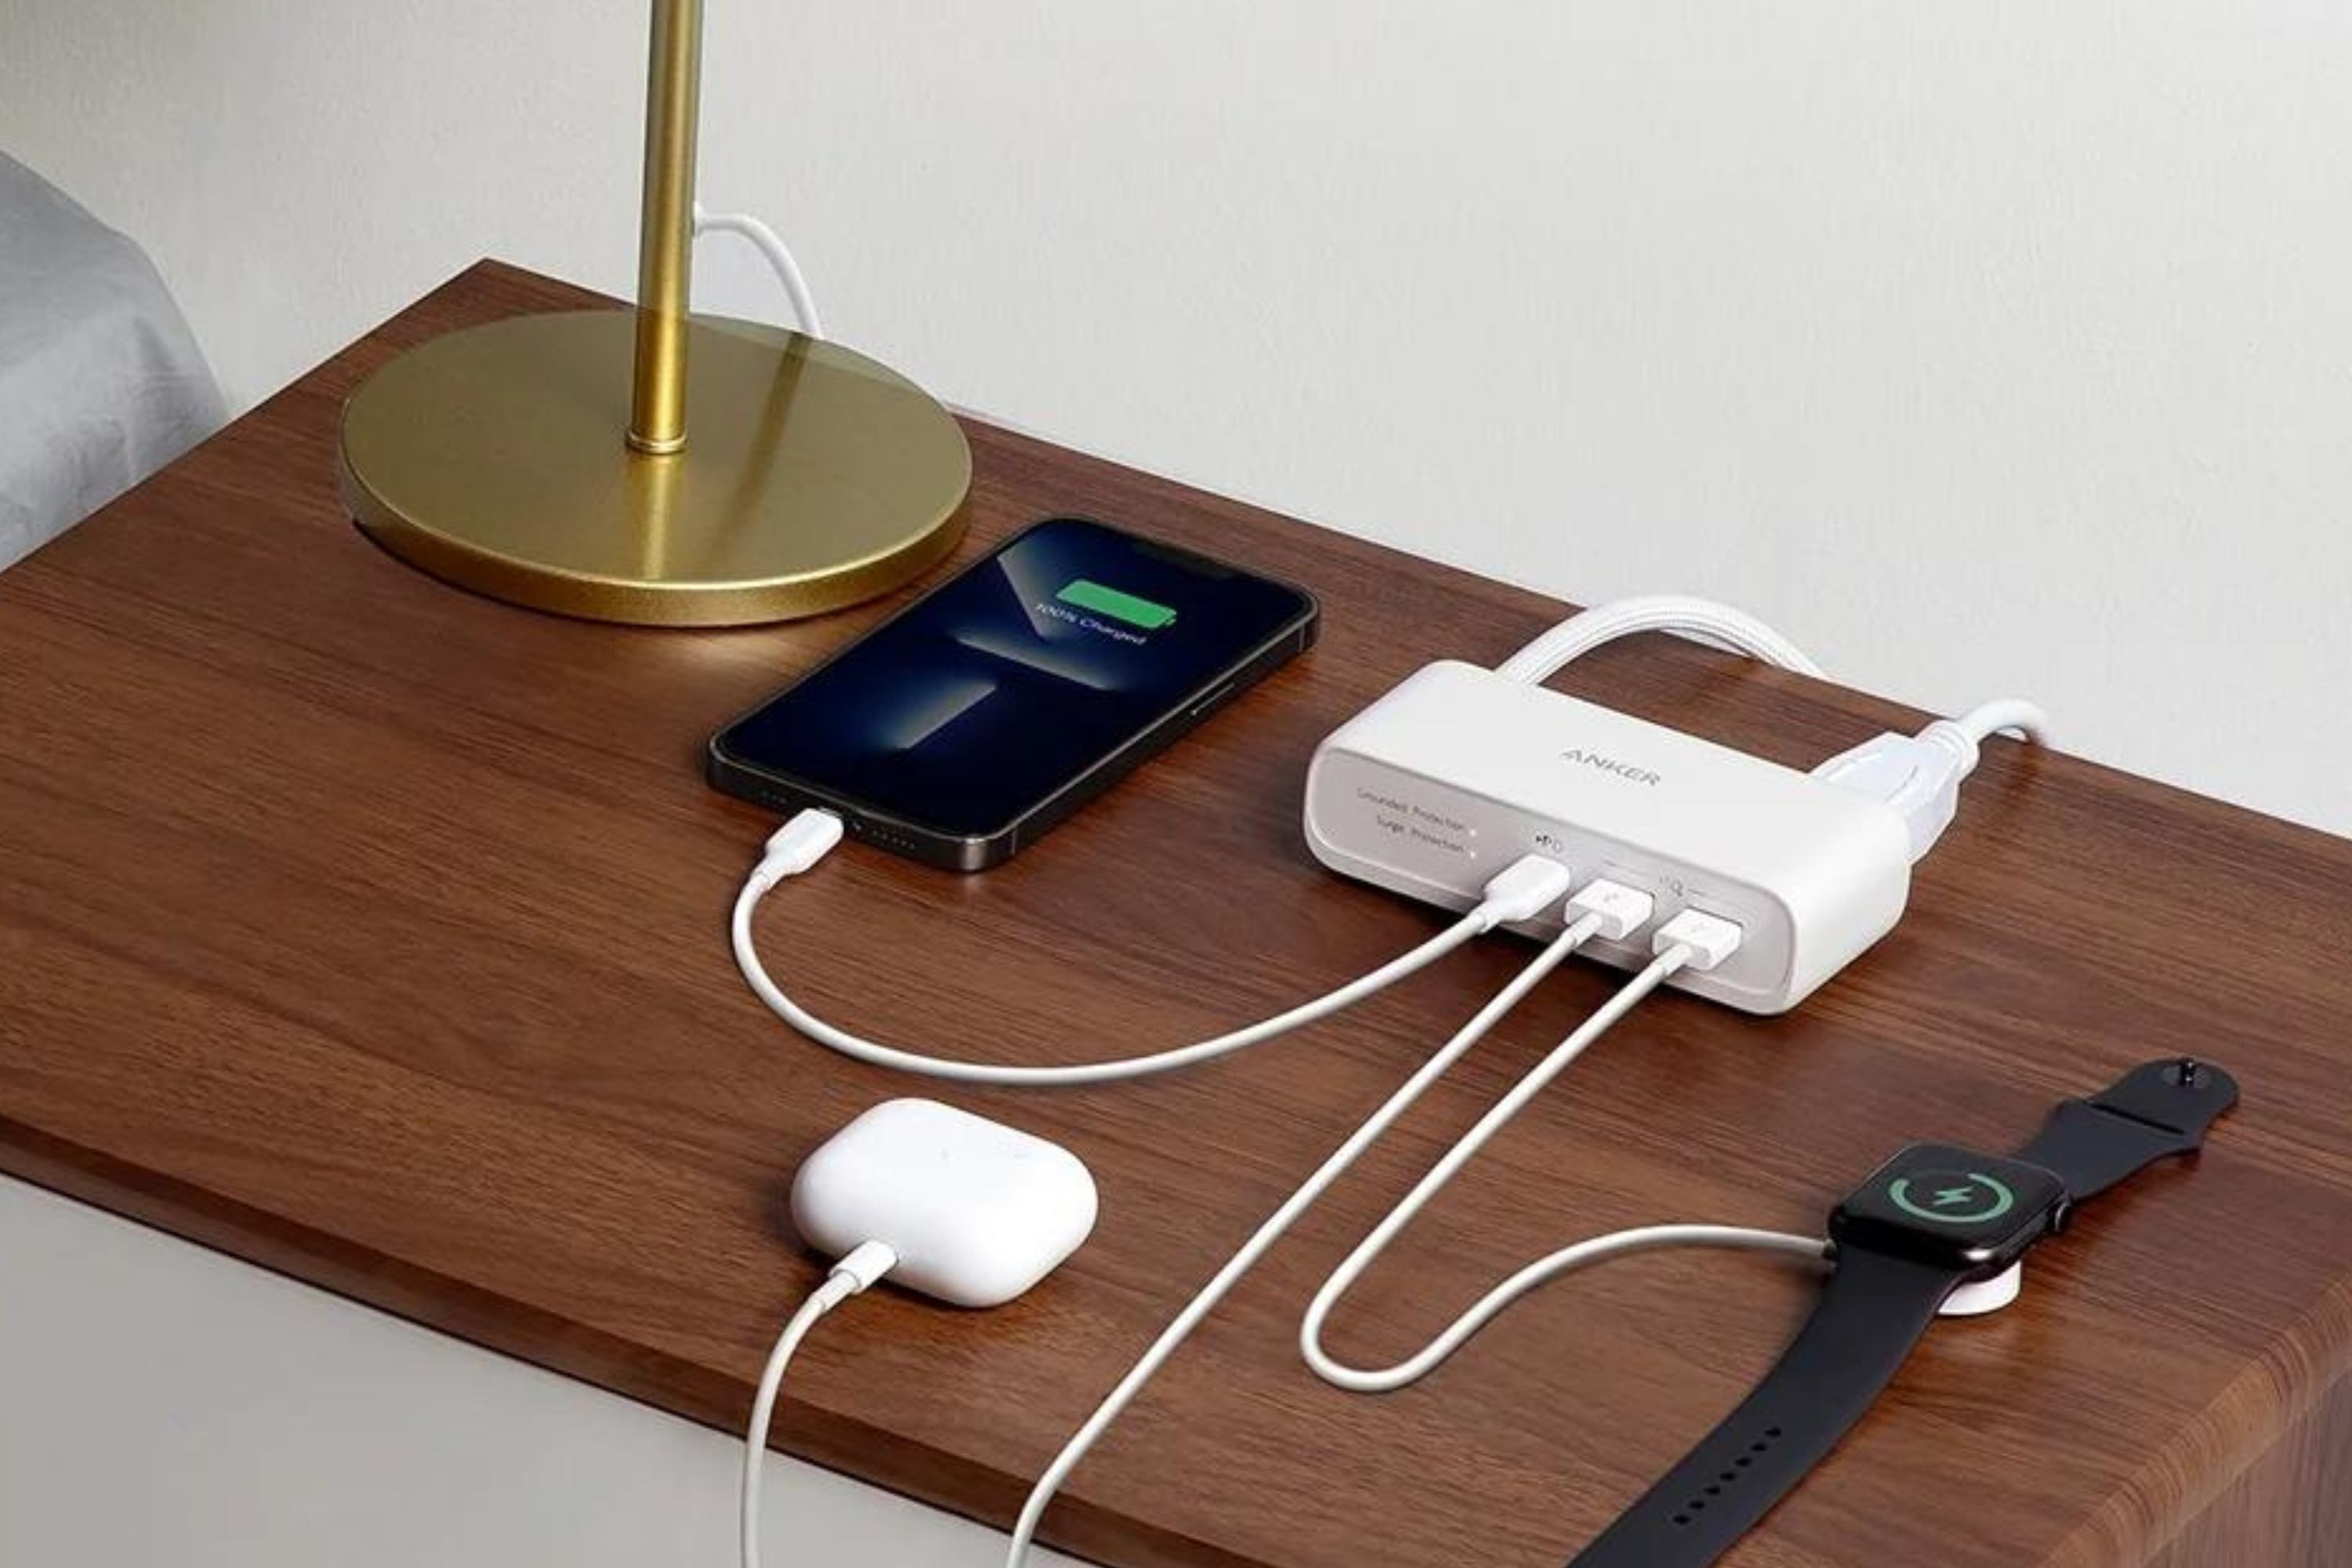 Anker 521 Power Strip with devices plugged in